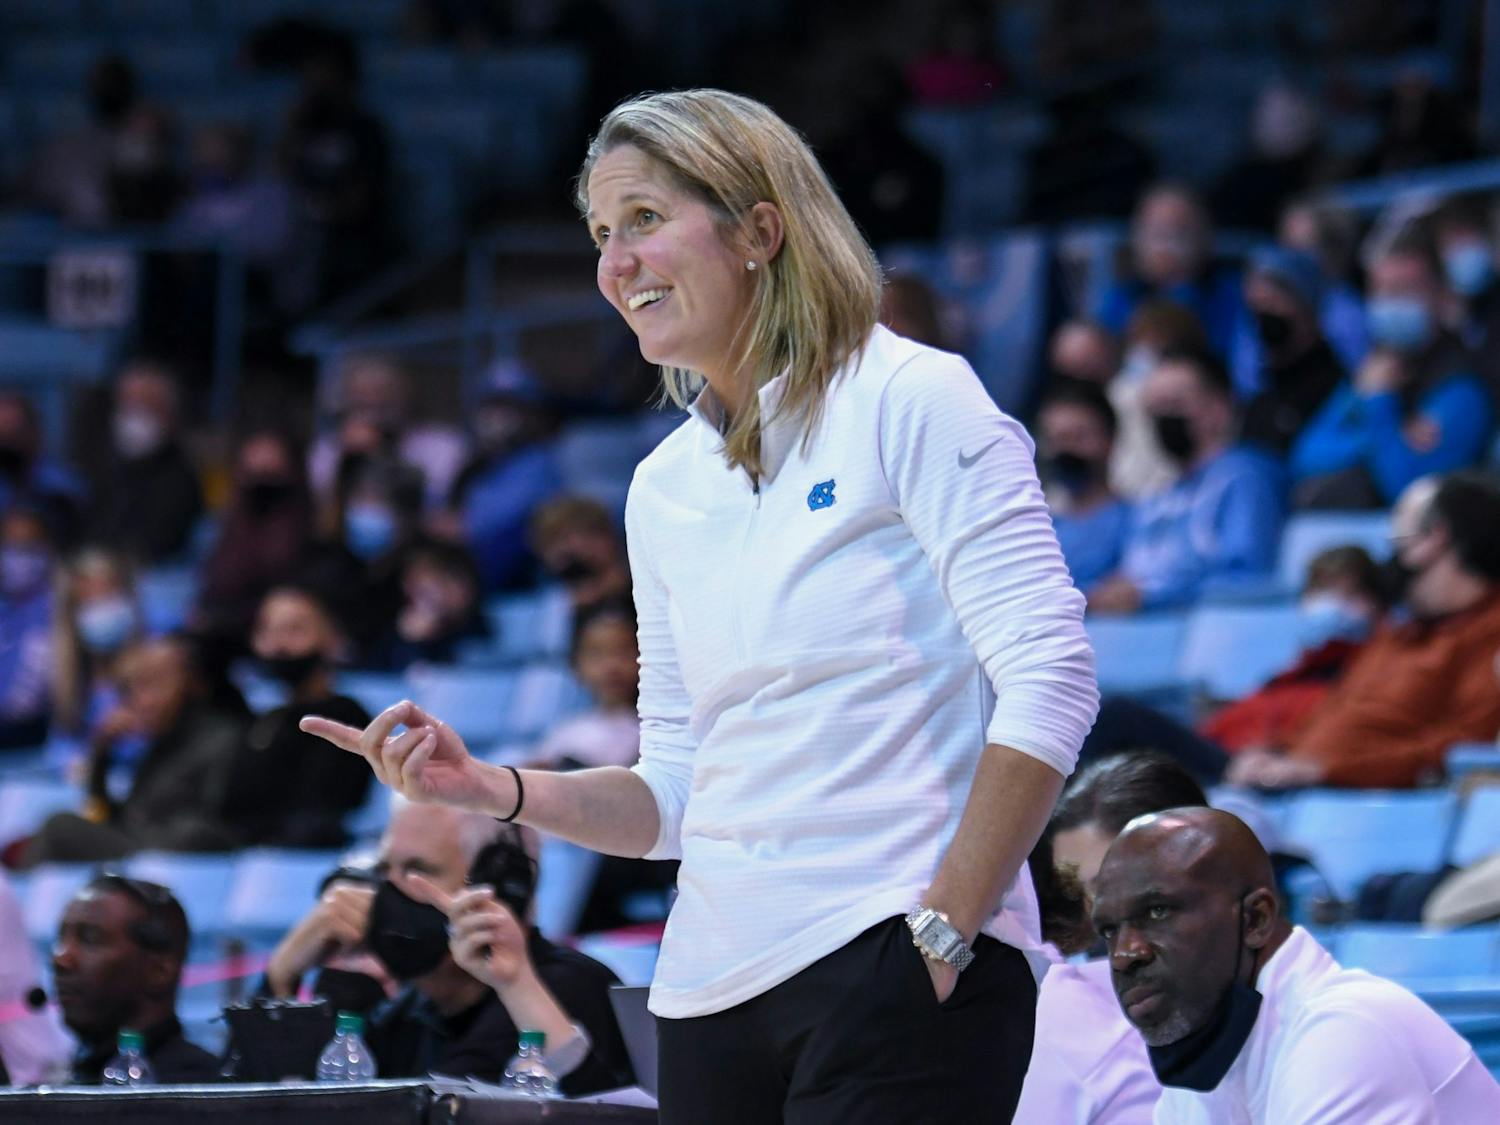 Head coach Courtney Banghart points and smiles at one of the players during the game against Alabama State in Carmichael Arena, on Dec 21, 2021.